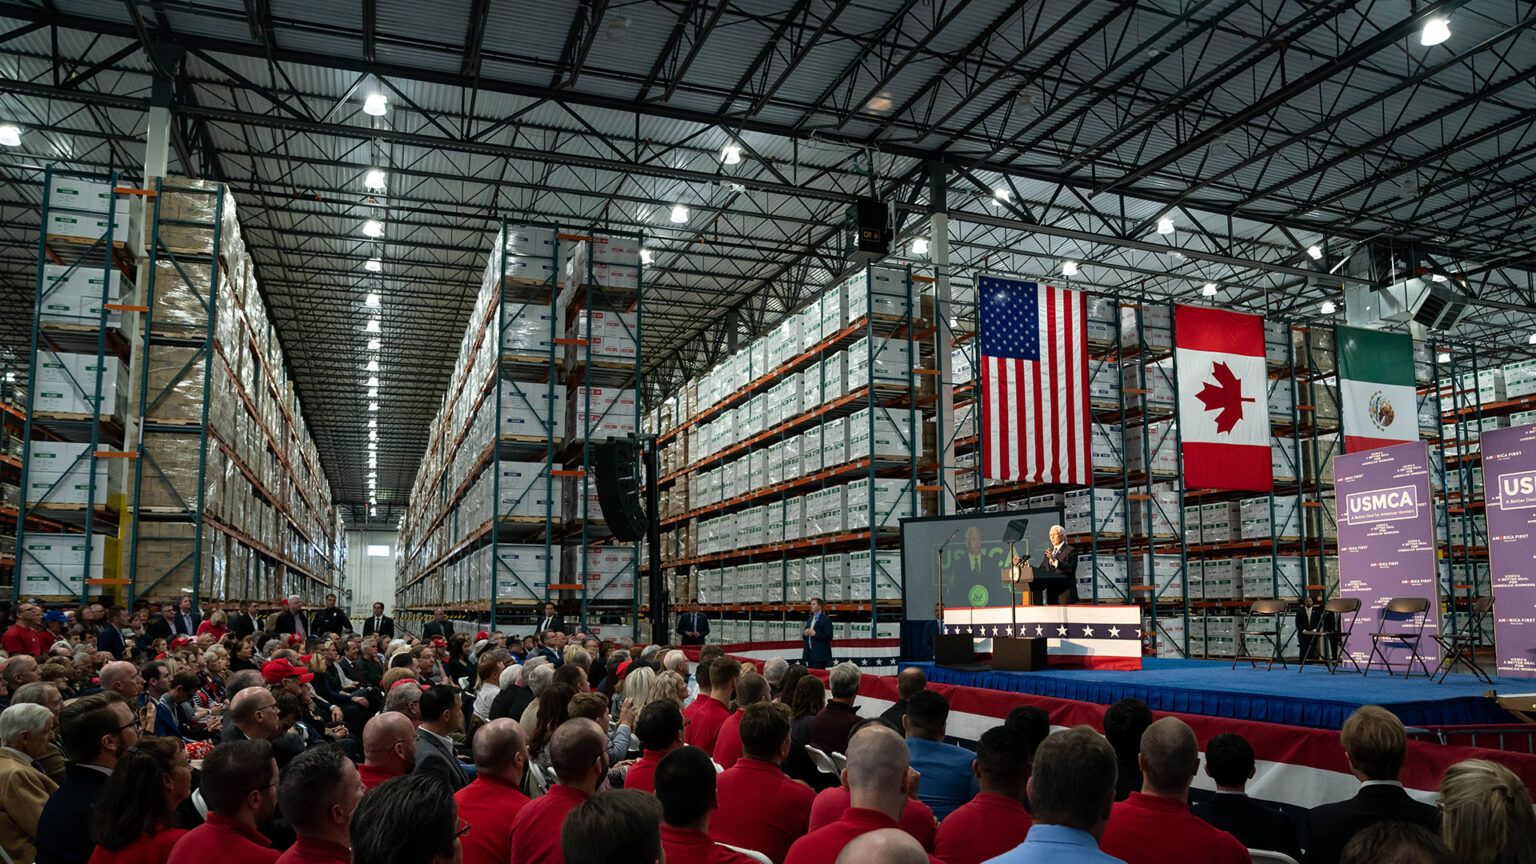 Mike Pence speaks from behind a podium on a stage in the middle of a large warehouse, facing a seated audience and with the U.S., Canada and Mexico flags mounted in front of multiple, long bays with six vertical levels of storage.